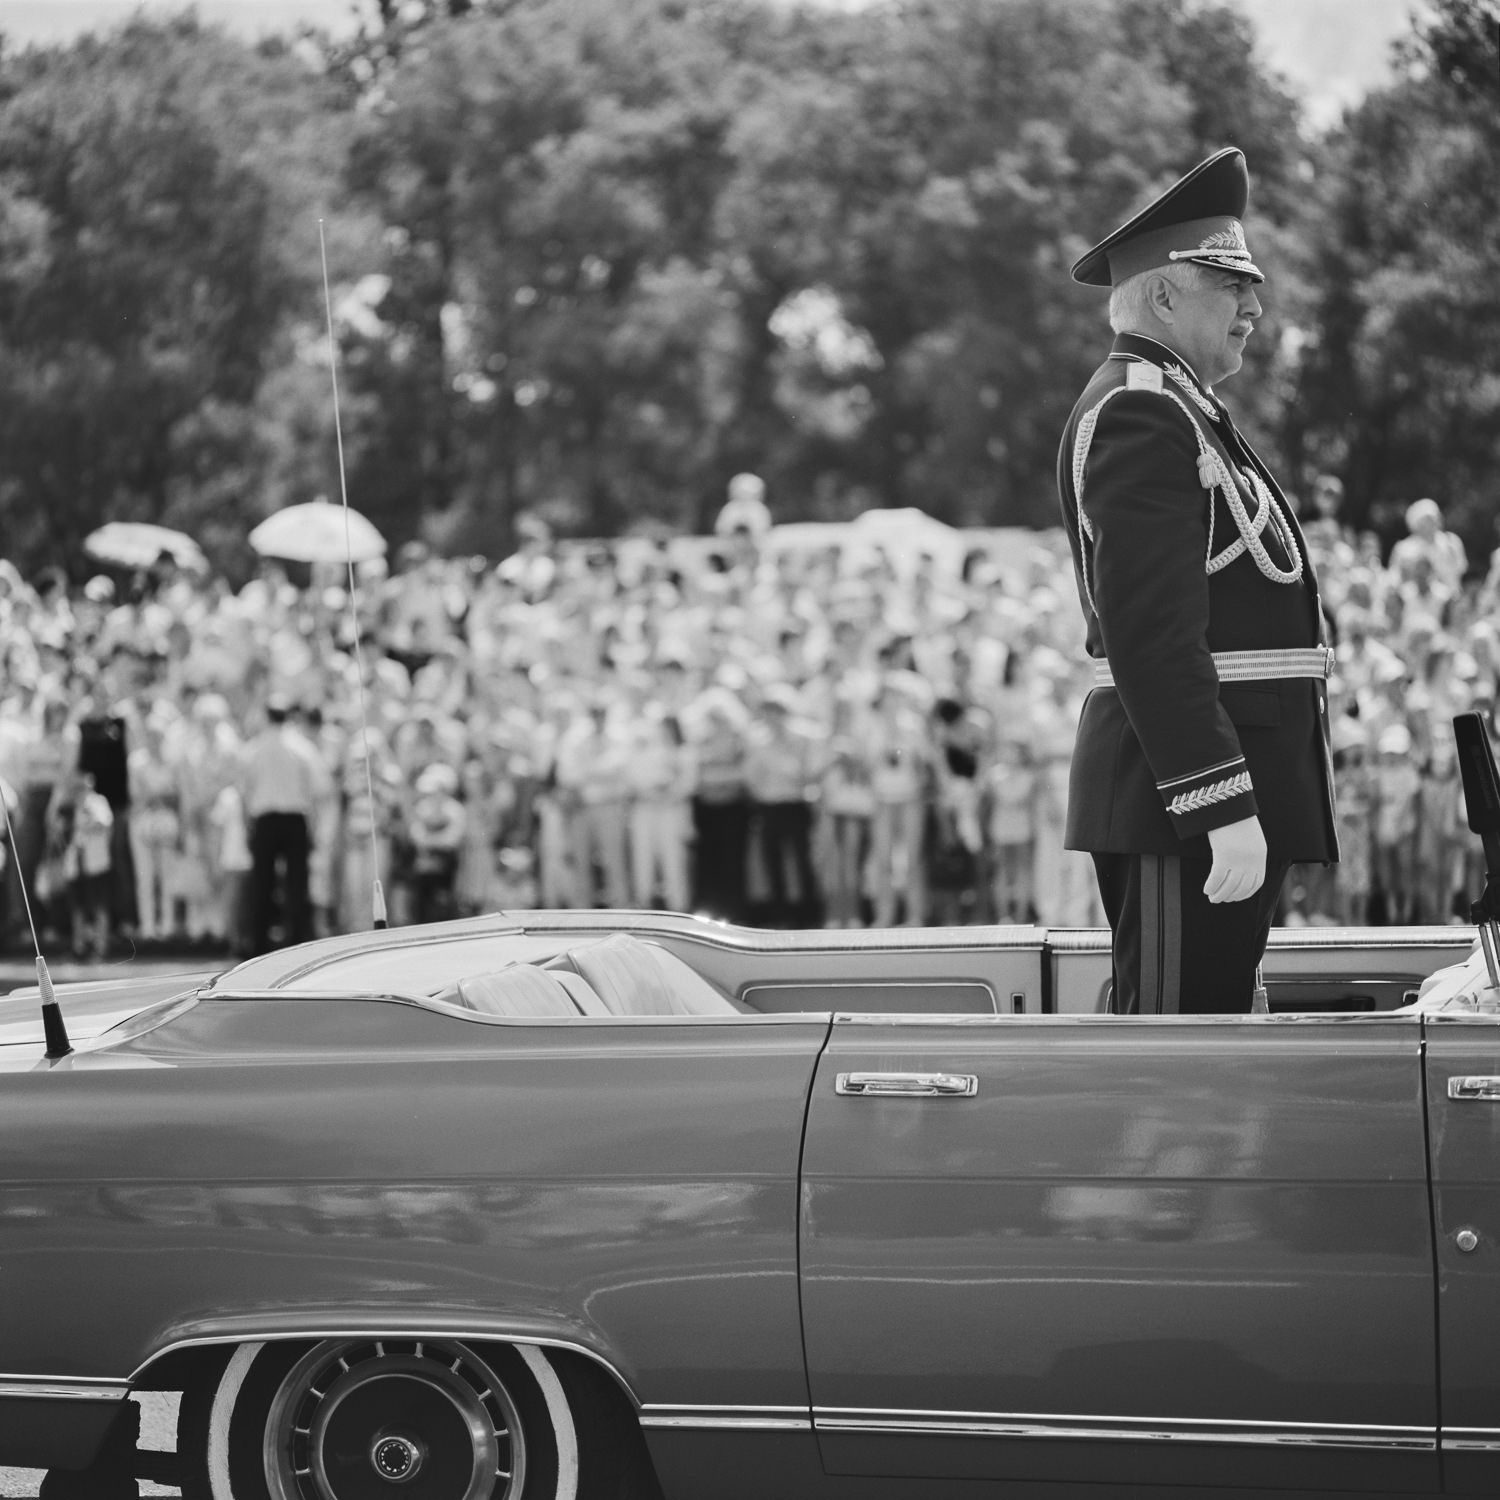 General of the Belarusian army in the car welcomes soldiers and participants of the victory procession, black-and-white film street photo